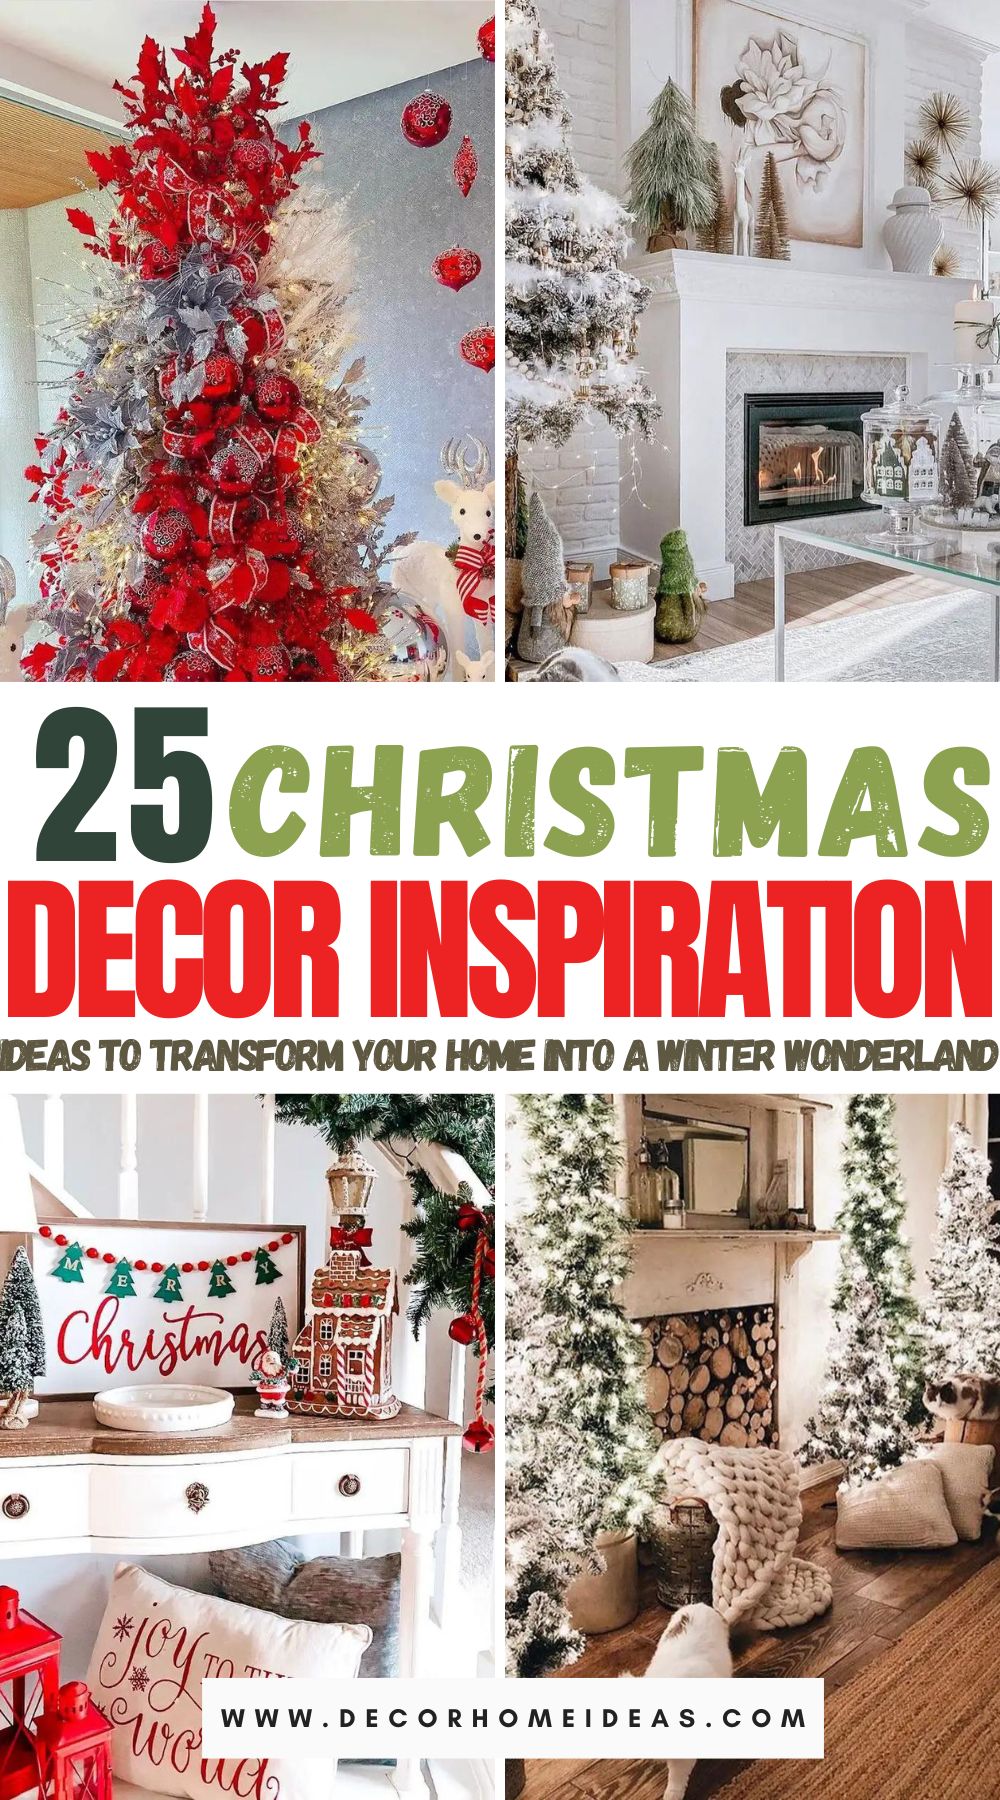 Get inspired with 25 breathtaking Christmas decor ideas to infuse your home with festive magic. From elegant table settings to cozy fireplace mantels, find inspiration to create a captivating holiday ambiance that will enchant family and friends alike.